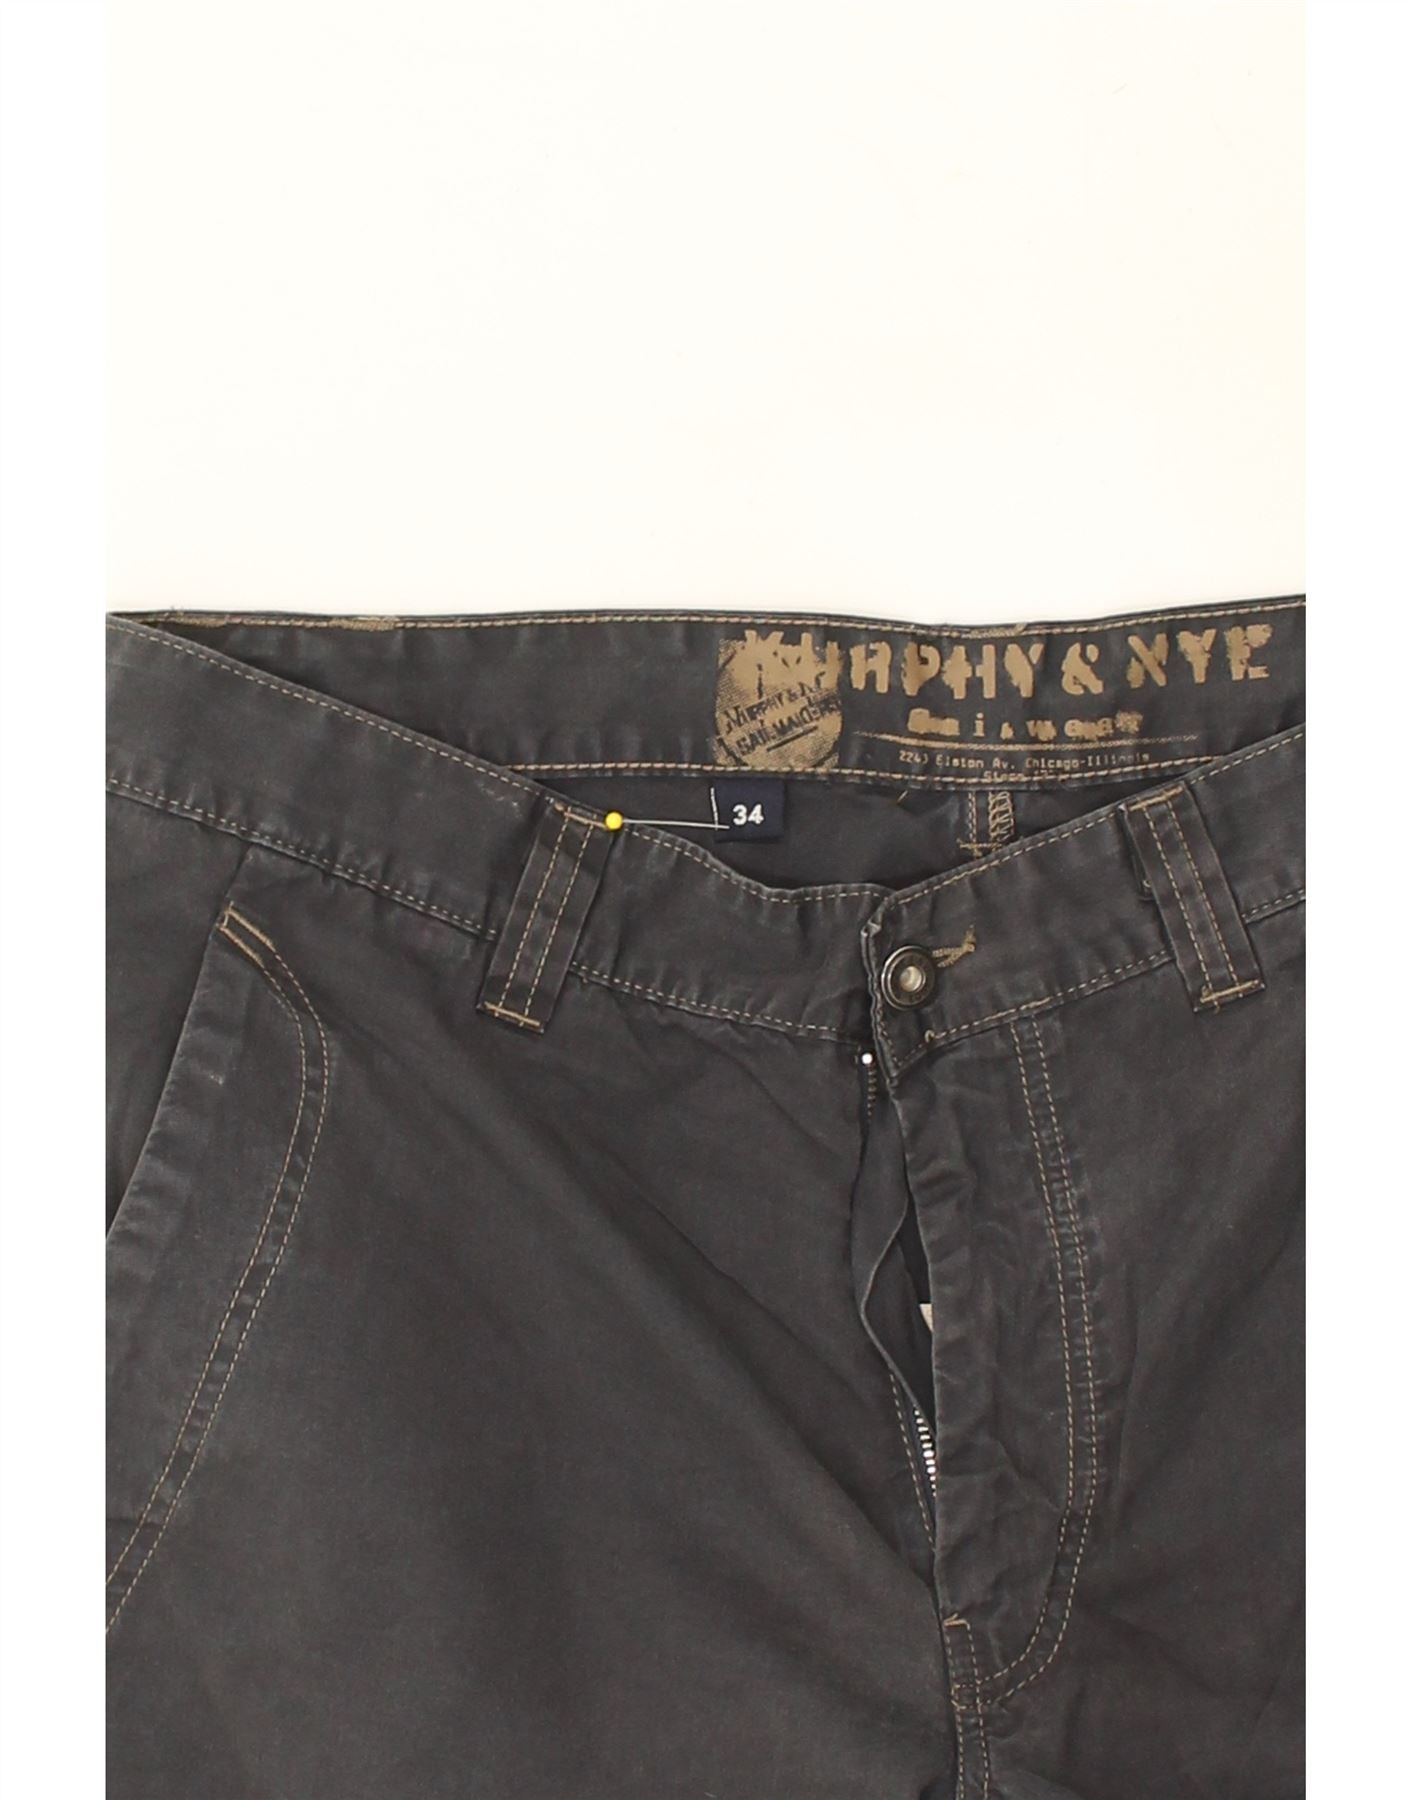 PATAGONIA Mens Chino Shorts W28 Small Navy Blue Cotton, Vintage &  Second-Hand Clothing Online